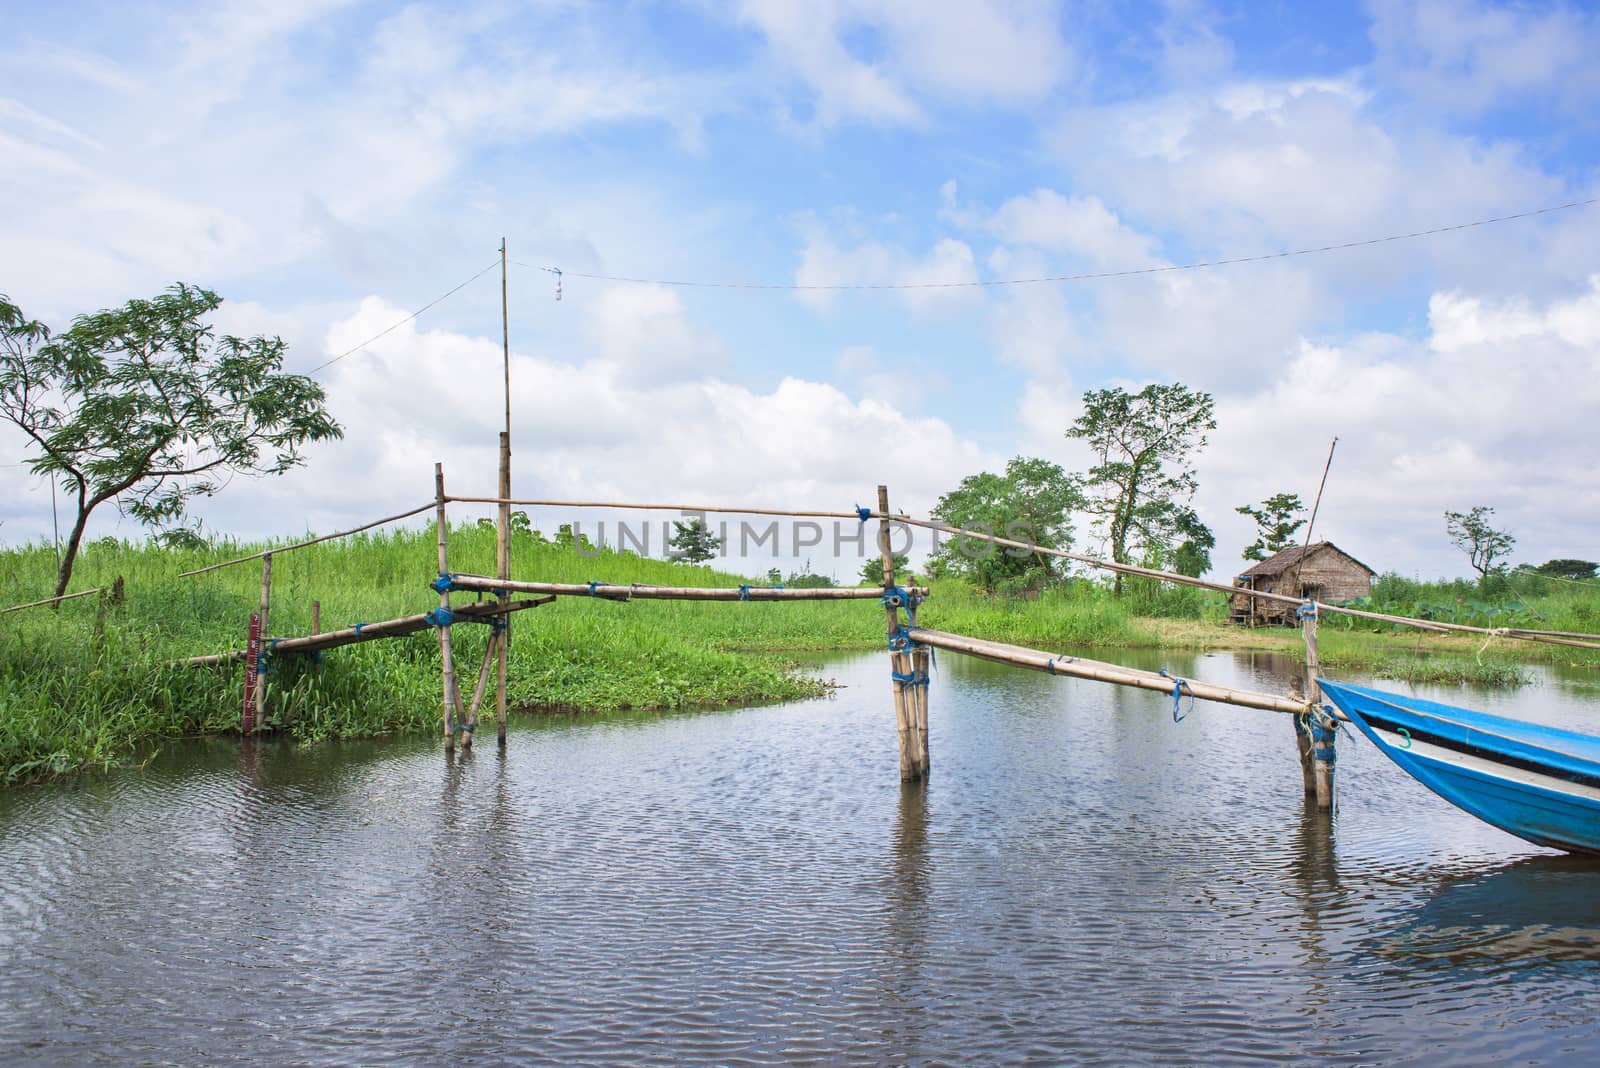 Farmland and canals at the Ayeyarwaddy Region in Myanmar. The region is home to the majority of rice as well as fish farming in Myanmar, but suffers from bad weather and flooding during the monsoon season.